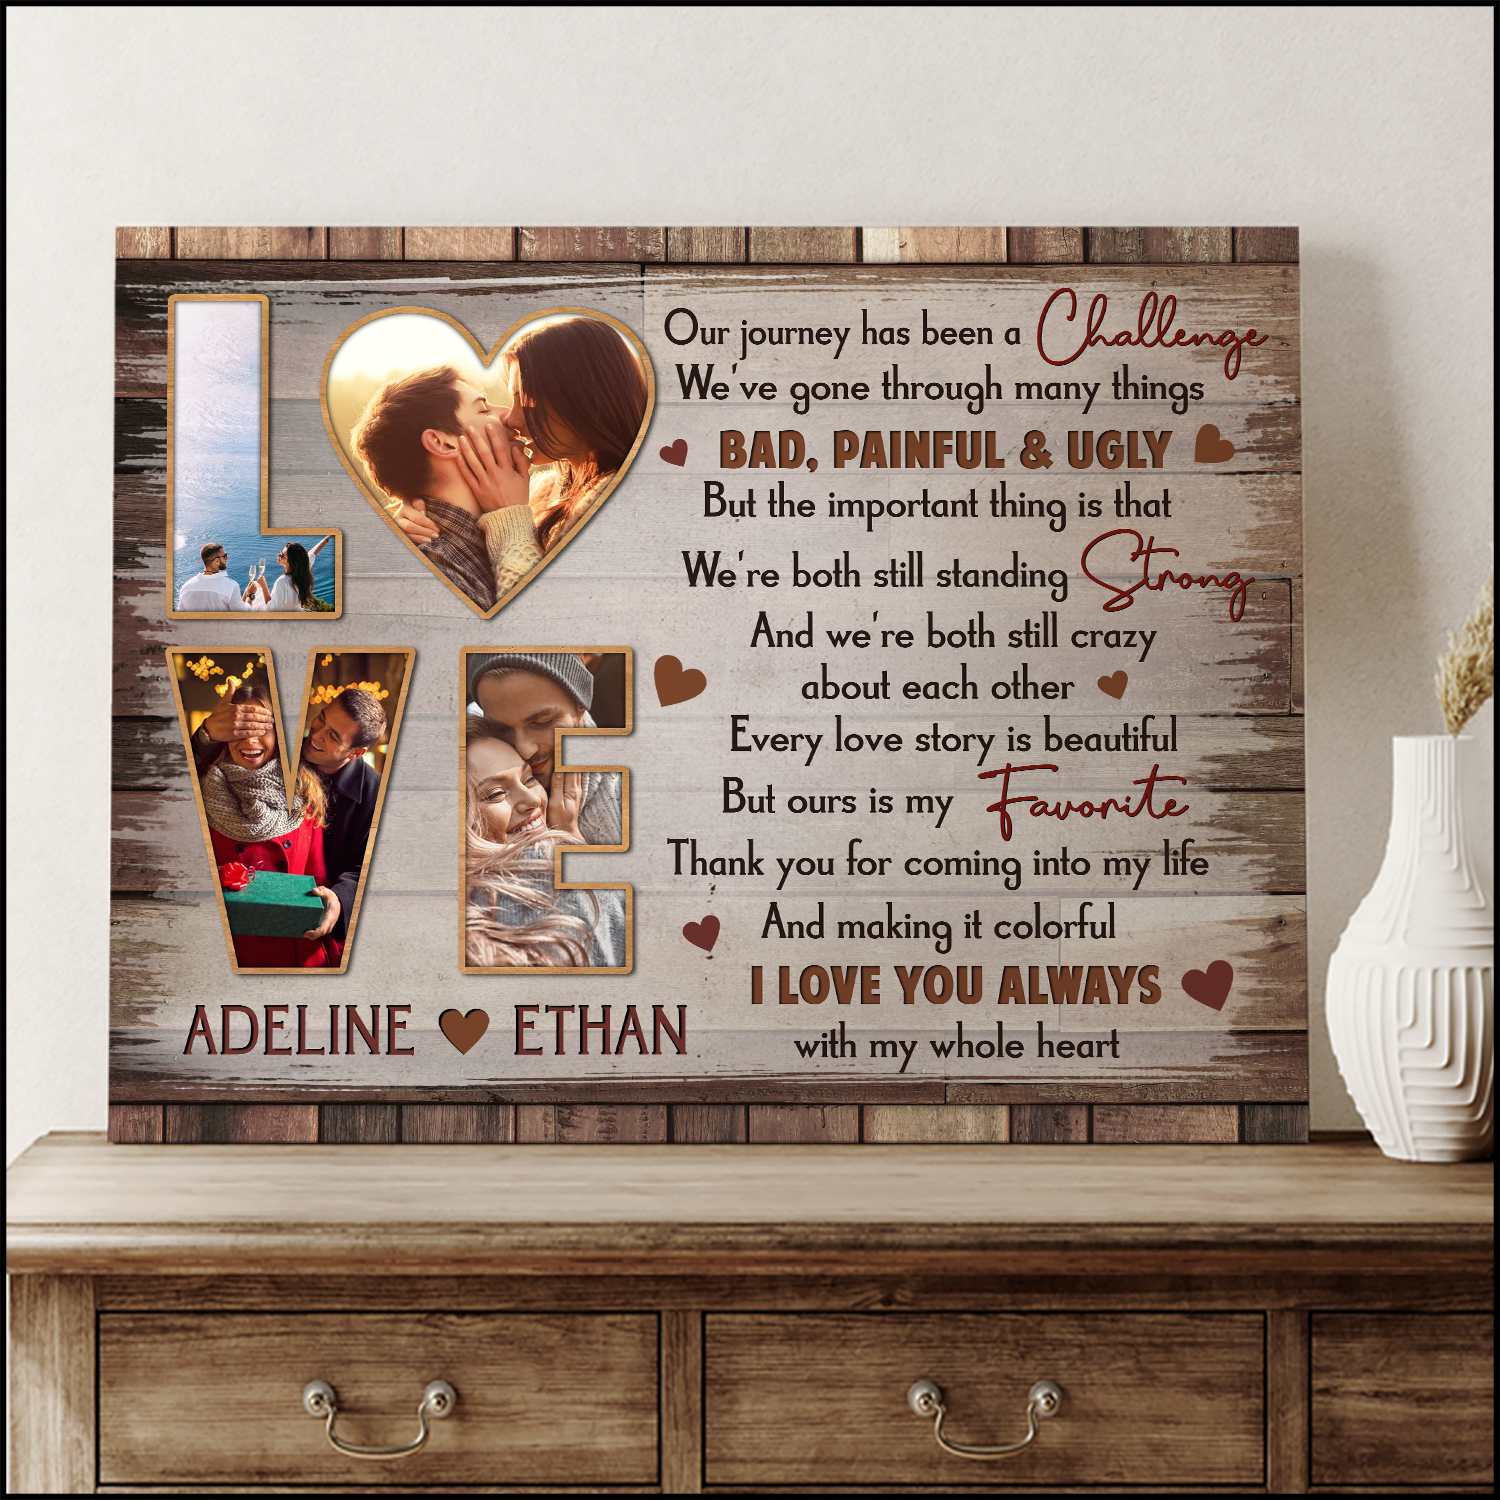 https://images.ohcanvas.com/ohcanvas_com/2023/01/12185508/unique-valentines-day-gift-ideas-personalized-couple-photo-collage-canvas-wall-art-1.jpg